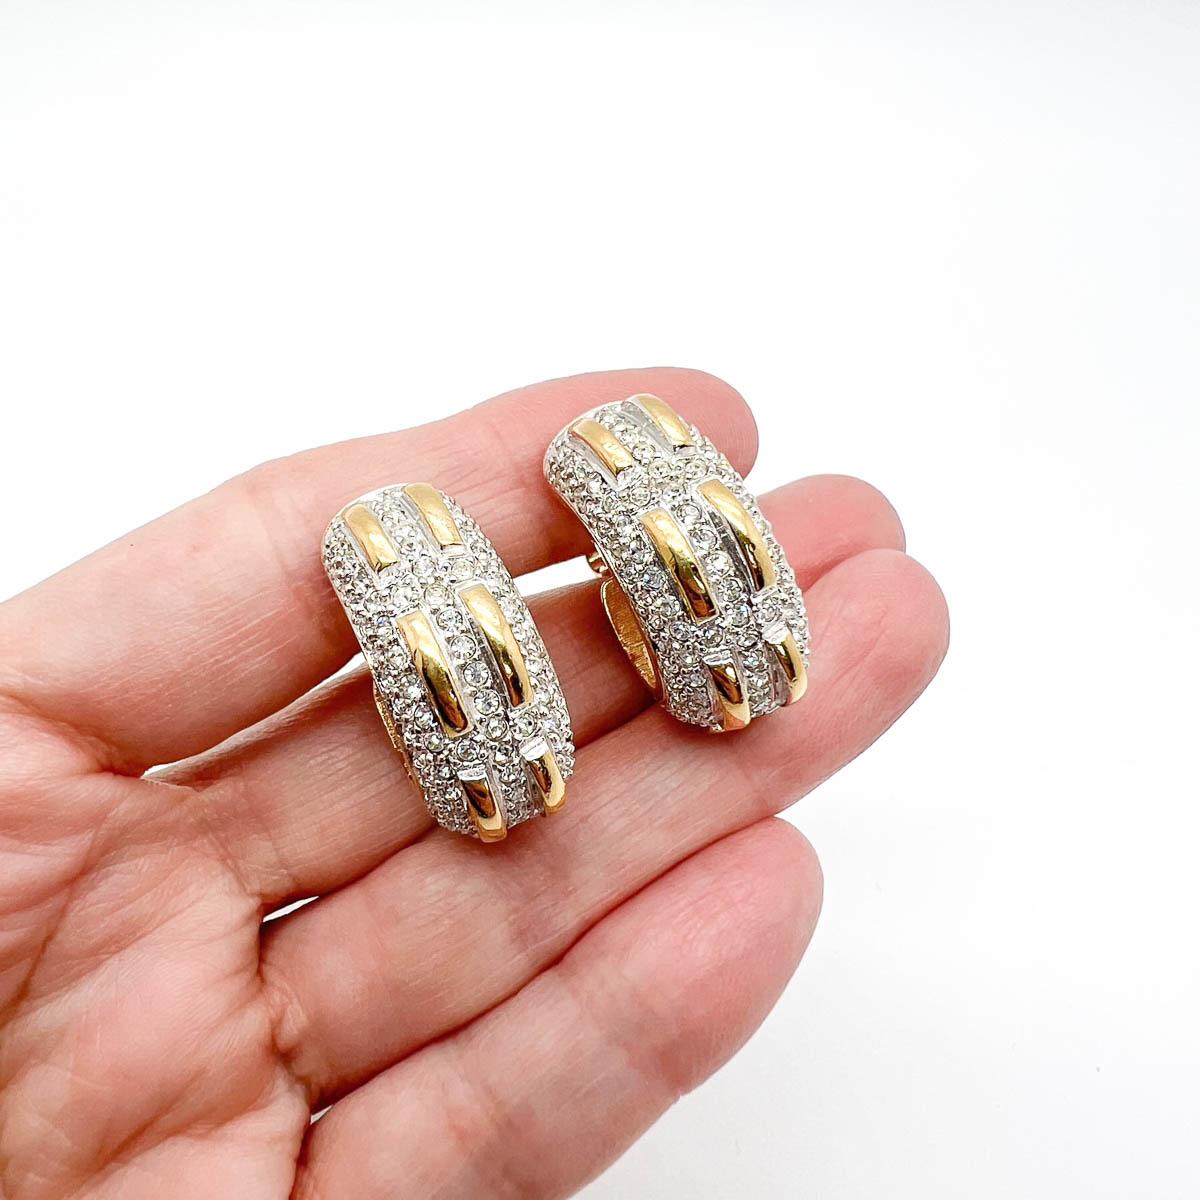 A gorgeous pair of Vintage Swarovski Huggie Earrings. The uber glam and wearable huggie hoop is embellished with pave set crystals and golden tracks. The gold and silver mix proving a perfect style statement. One that you will want to wear and wear